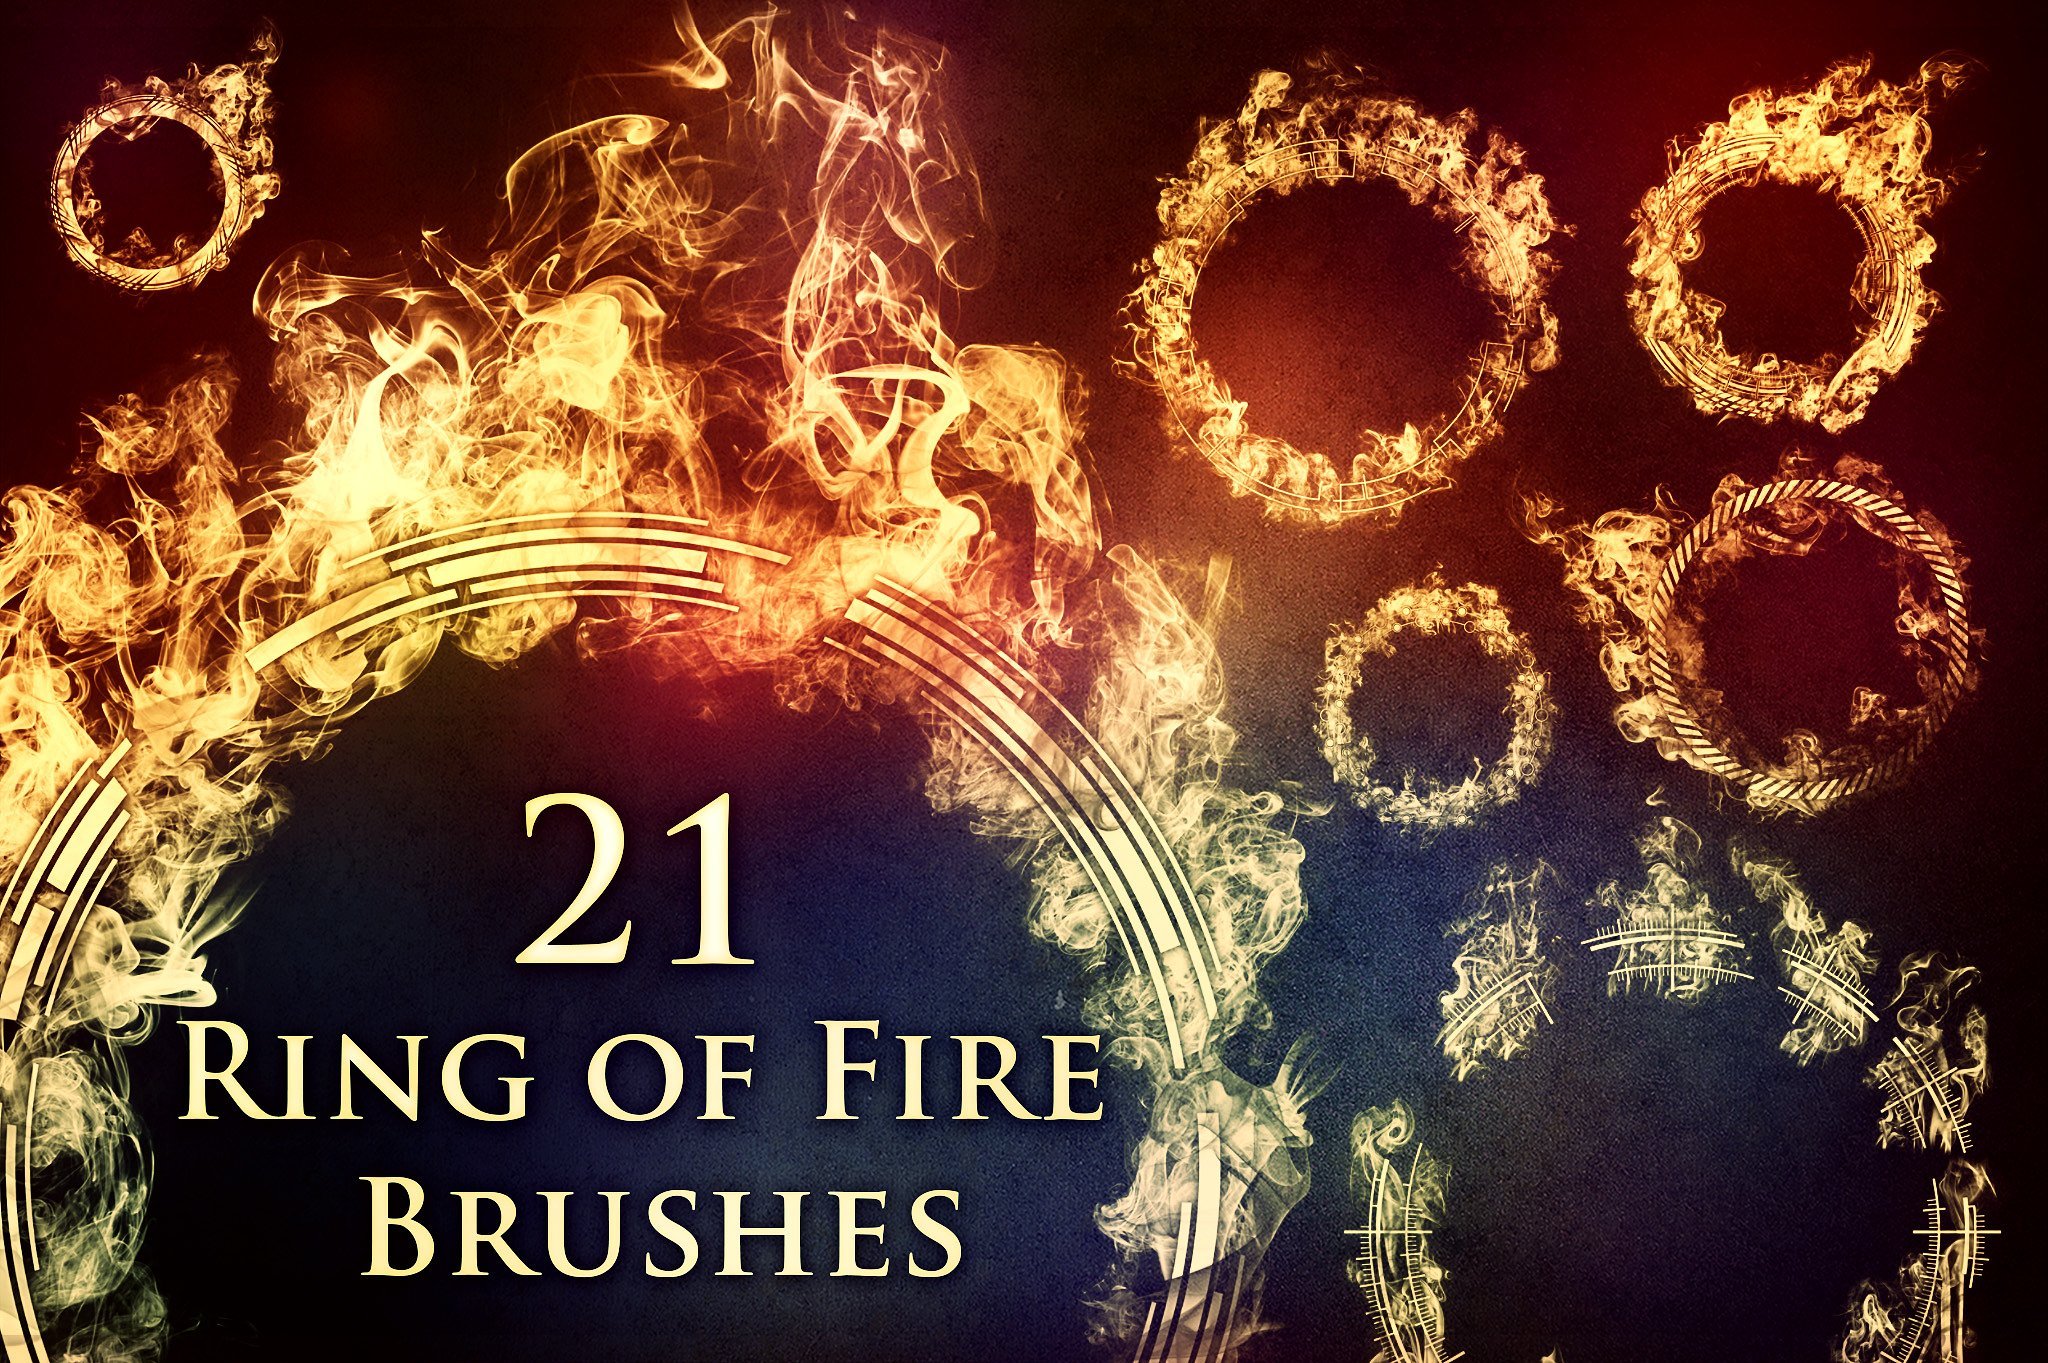 21 ring of fire brushes.